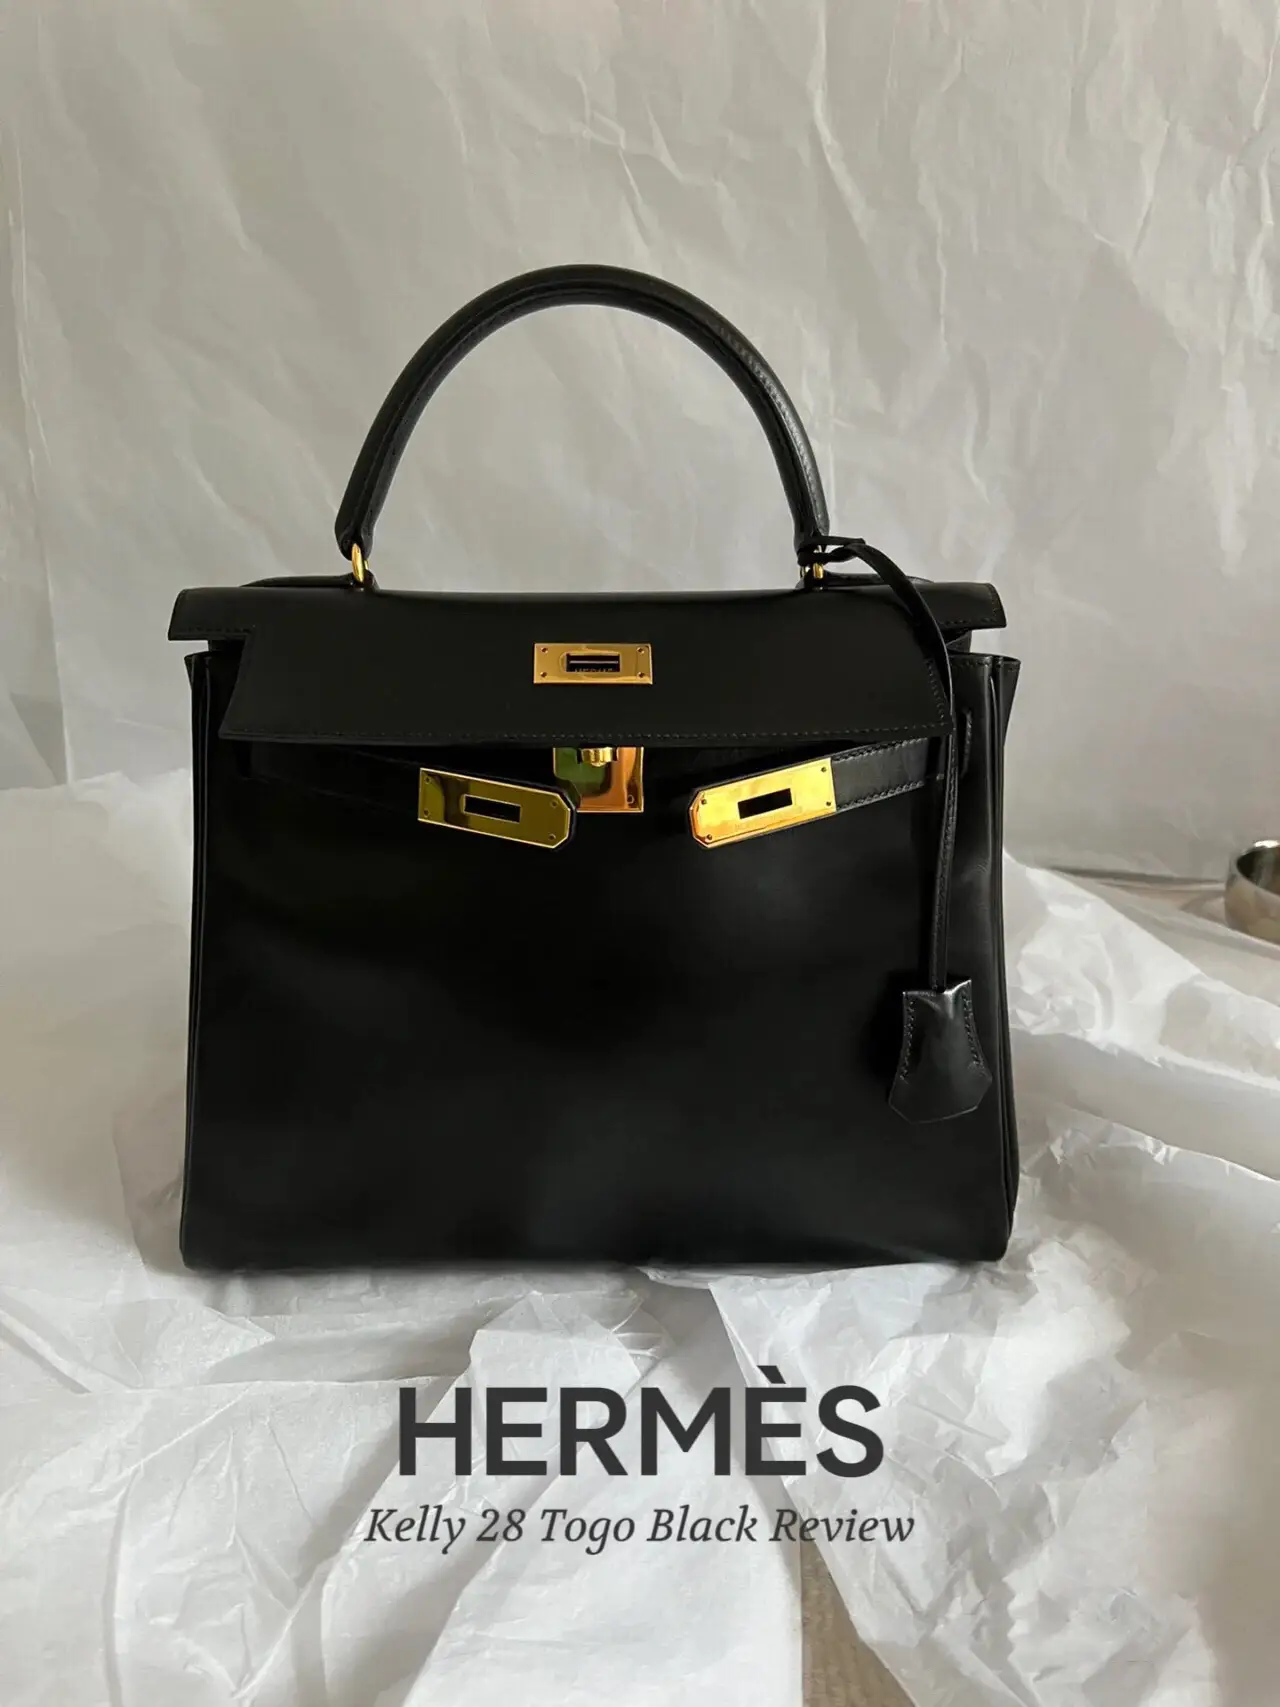 Hermes Kelly or Birkin? My opinion and review